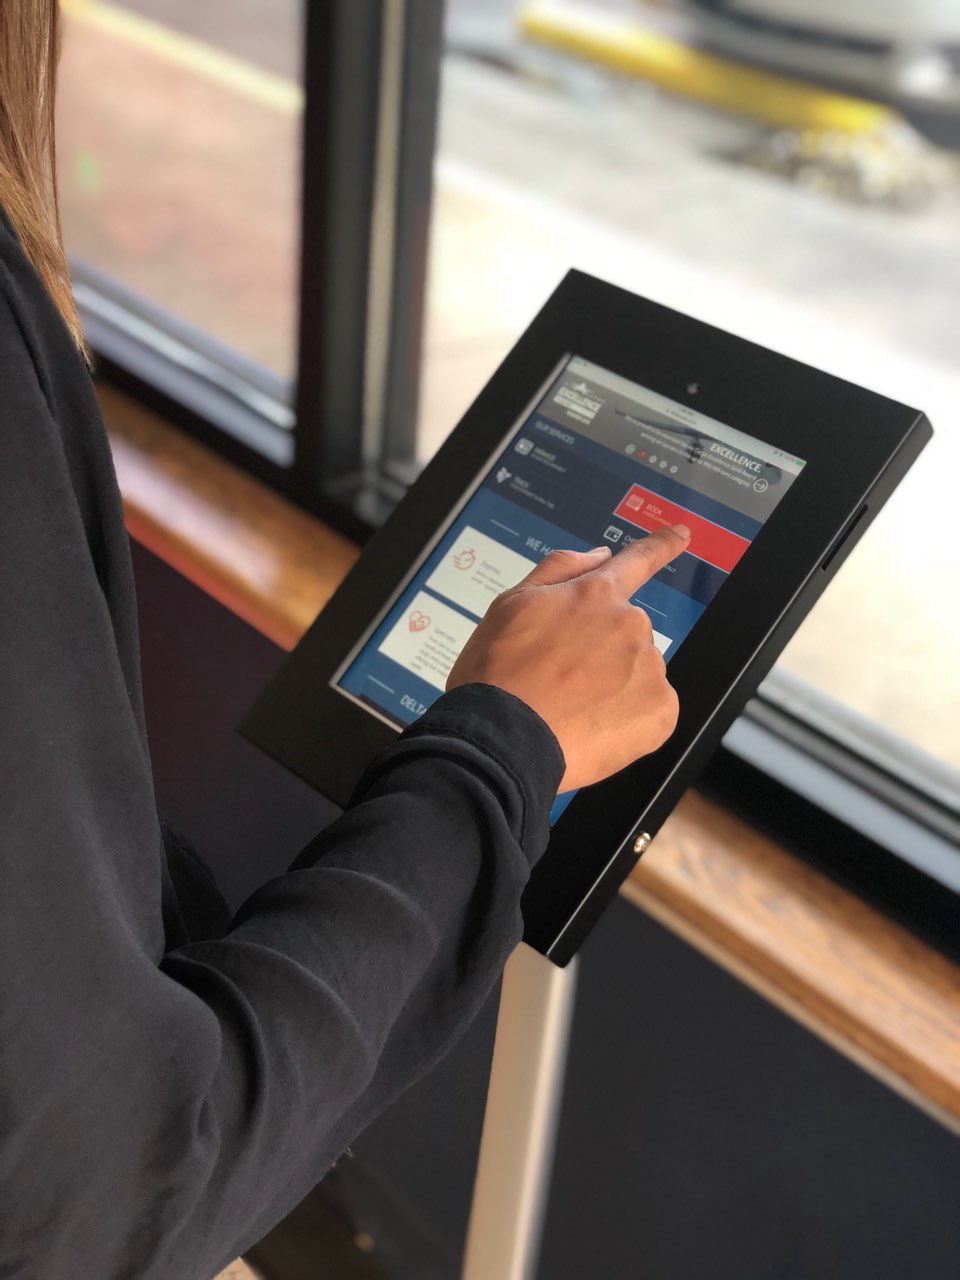 Delta Cargo to Install Self-Service iPad Kiosks at More Hubs in USA. Click to enlarge.